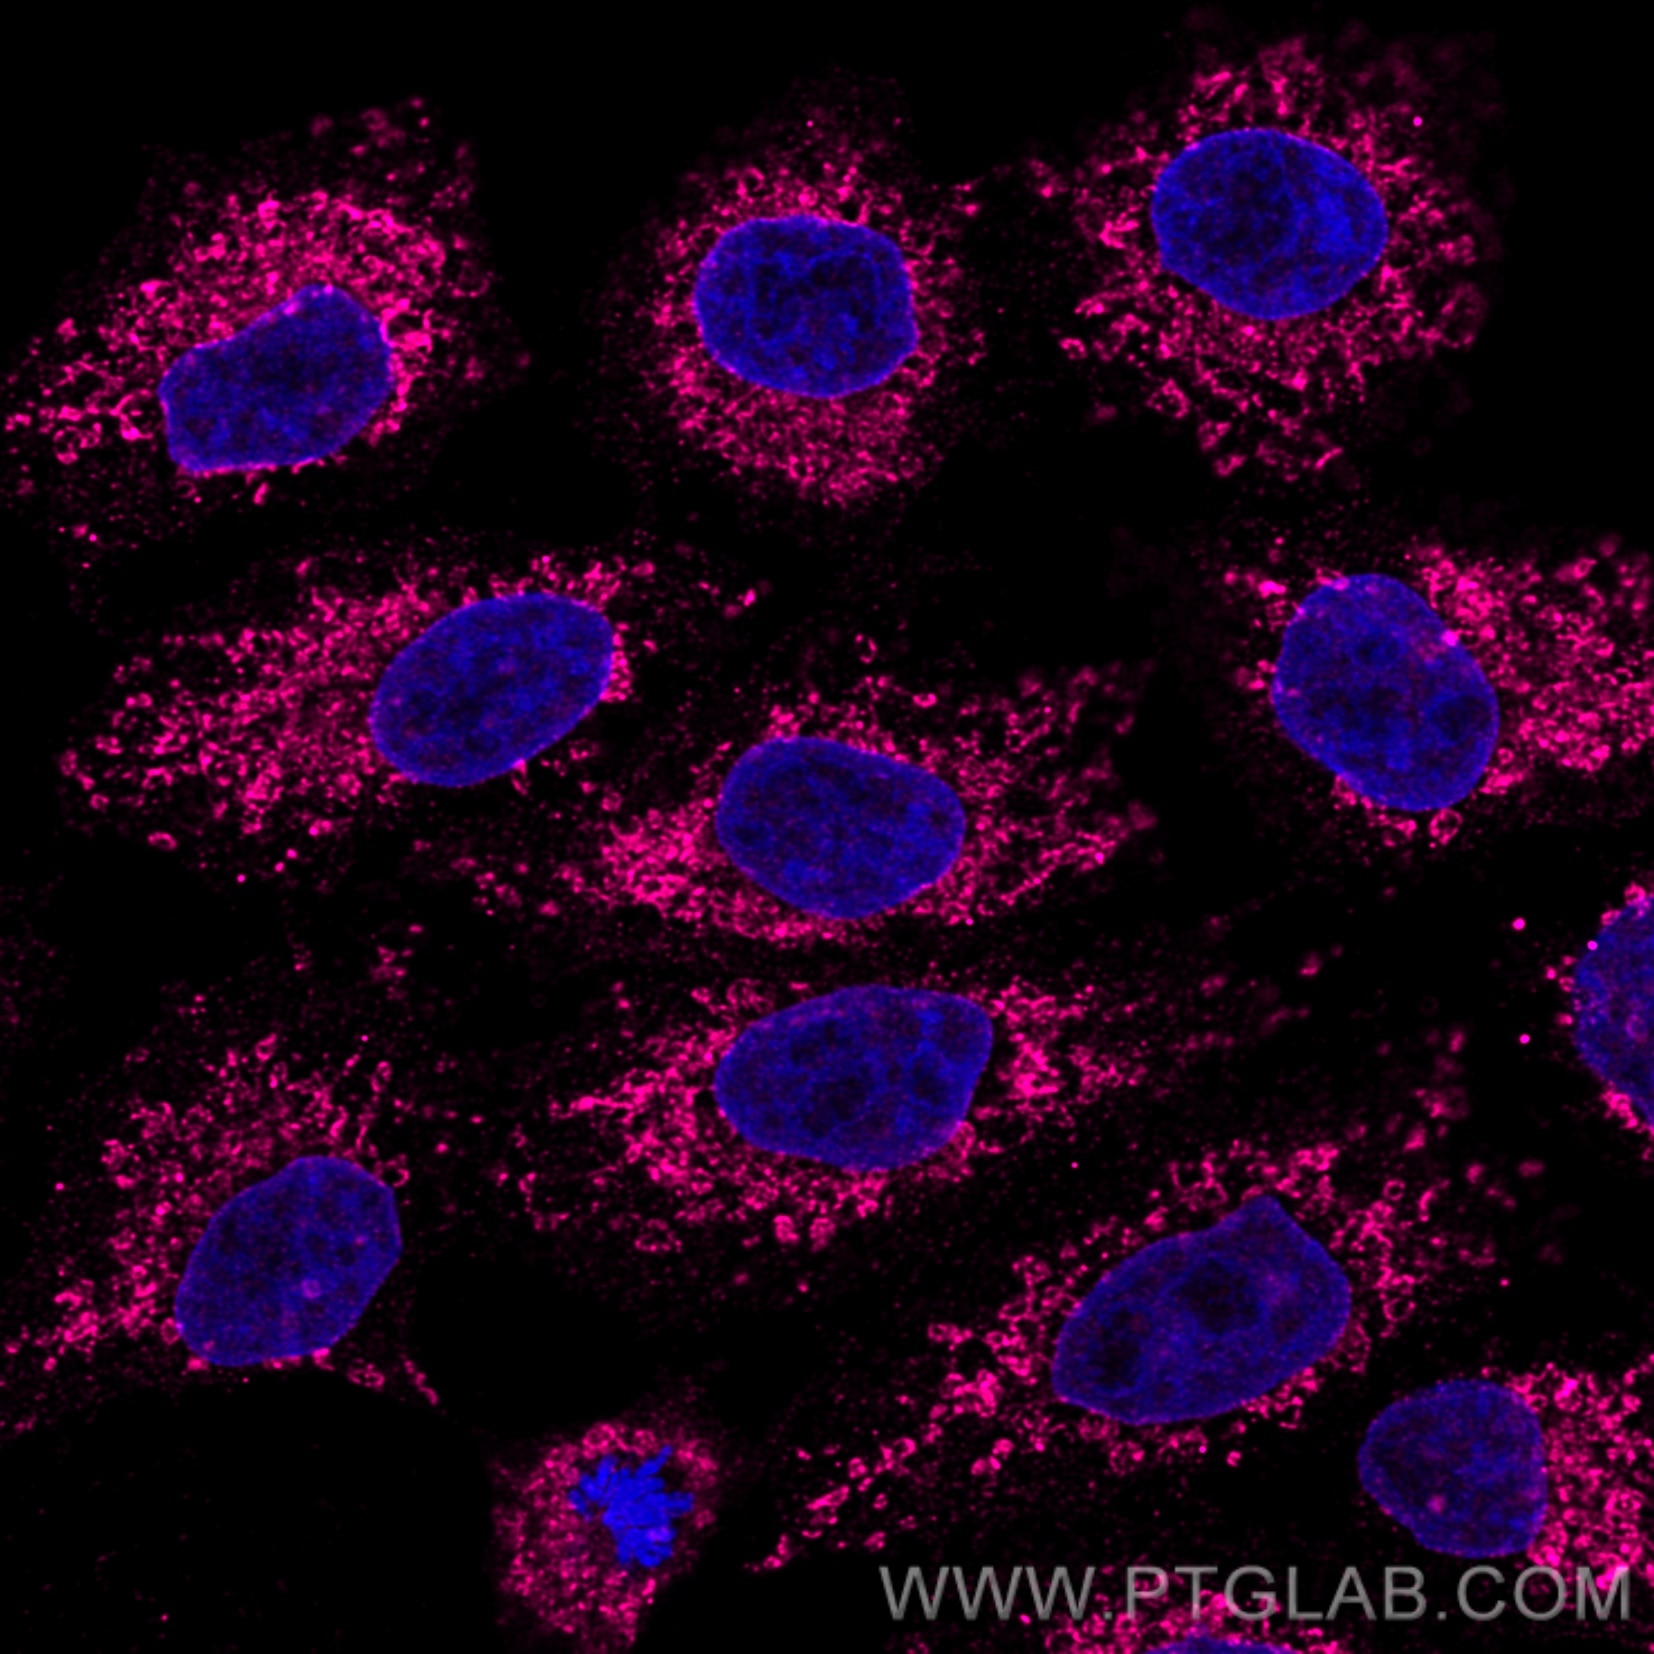 Immunofluorescence of HeLa: PFA-fixed HeLa cells were stained with anti-Tom20 (66777-1-Ig) labeled with FlexAble ​CoraLite® Plus 647 Kit (KFA063, magenta). Nuclei were stained with DAPI (blue). Confocal images were acquired with a 100x oil objective and post-processed. Images were recorded at the Core Facility Bioimaging at the Biomedical Center, LMU Munich.